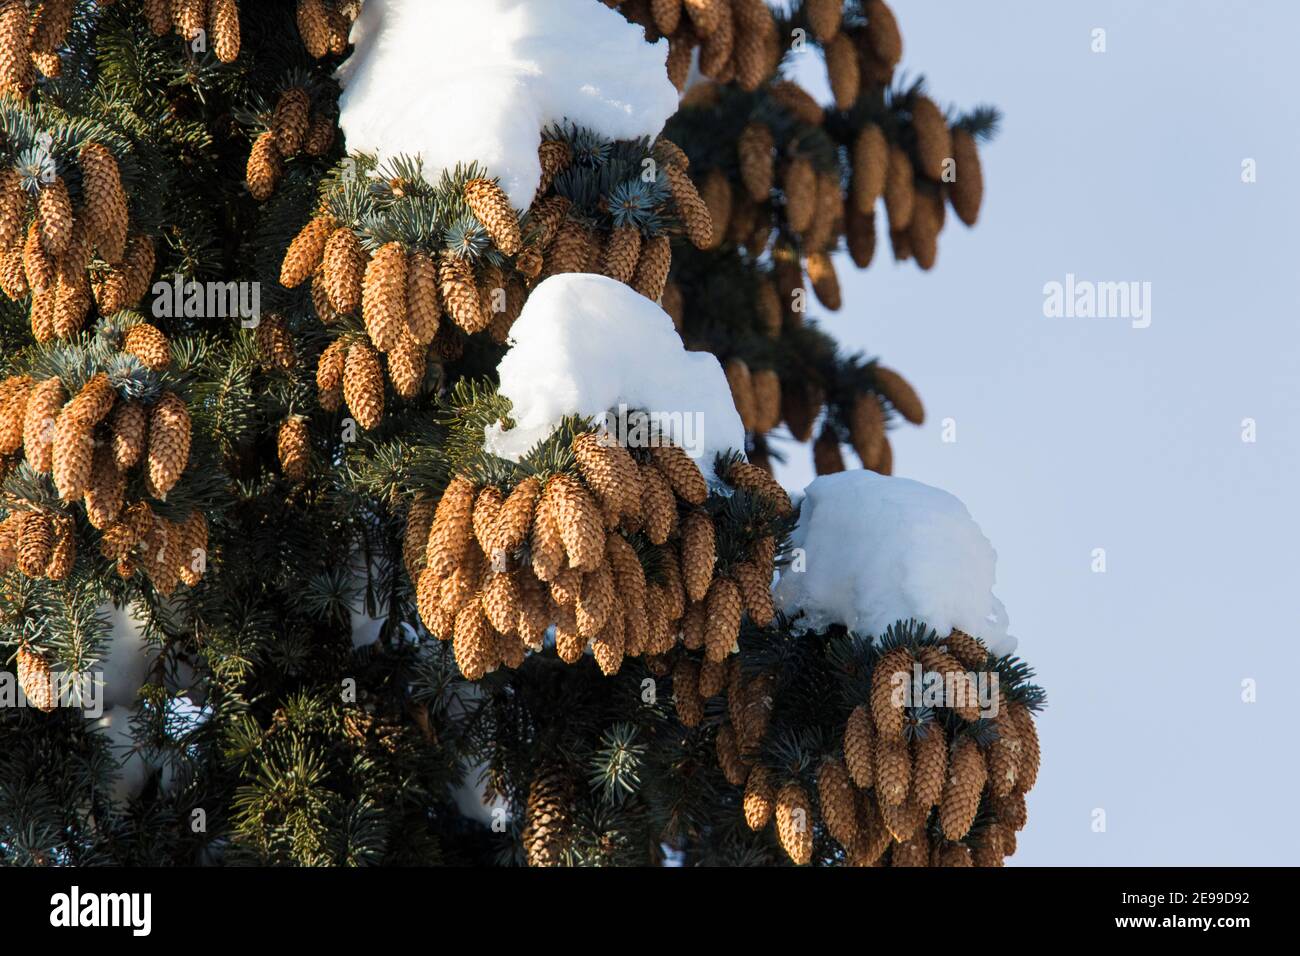 Abies concolor, the white fir in winter Stock Photo